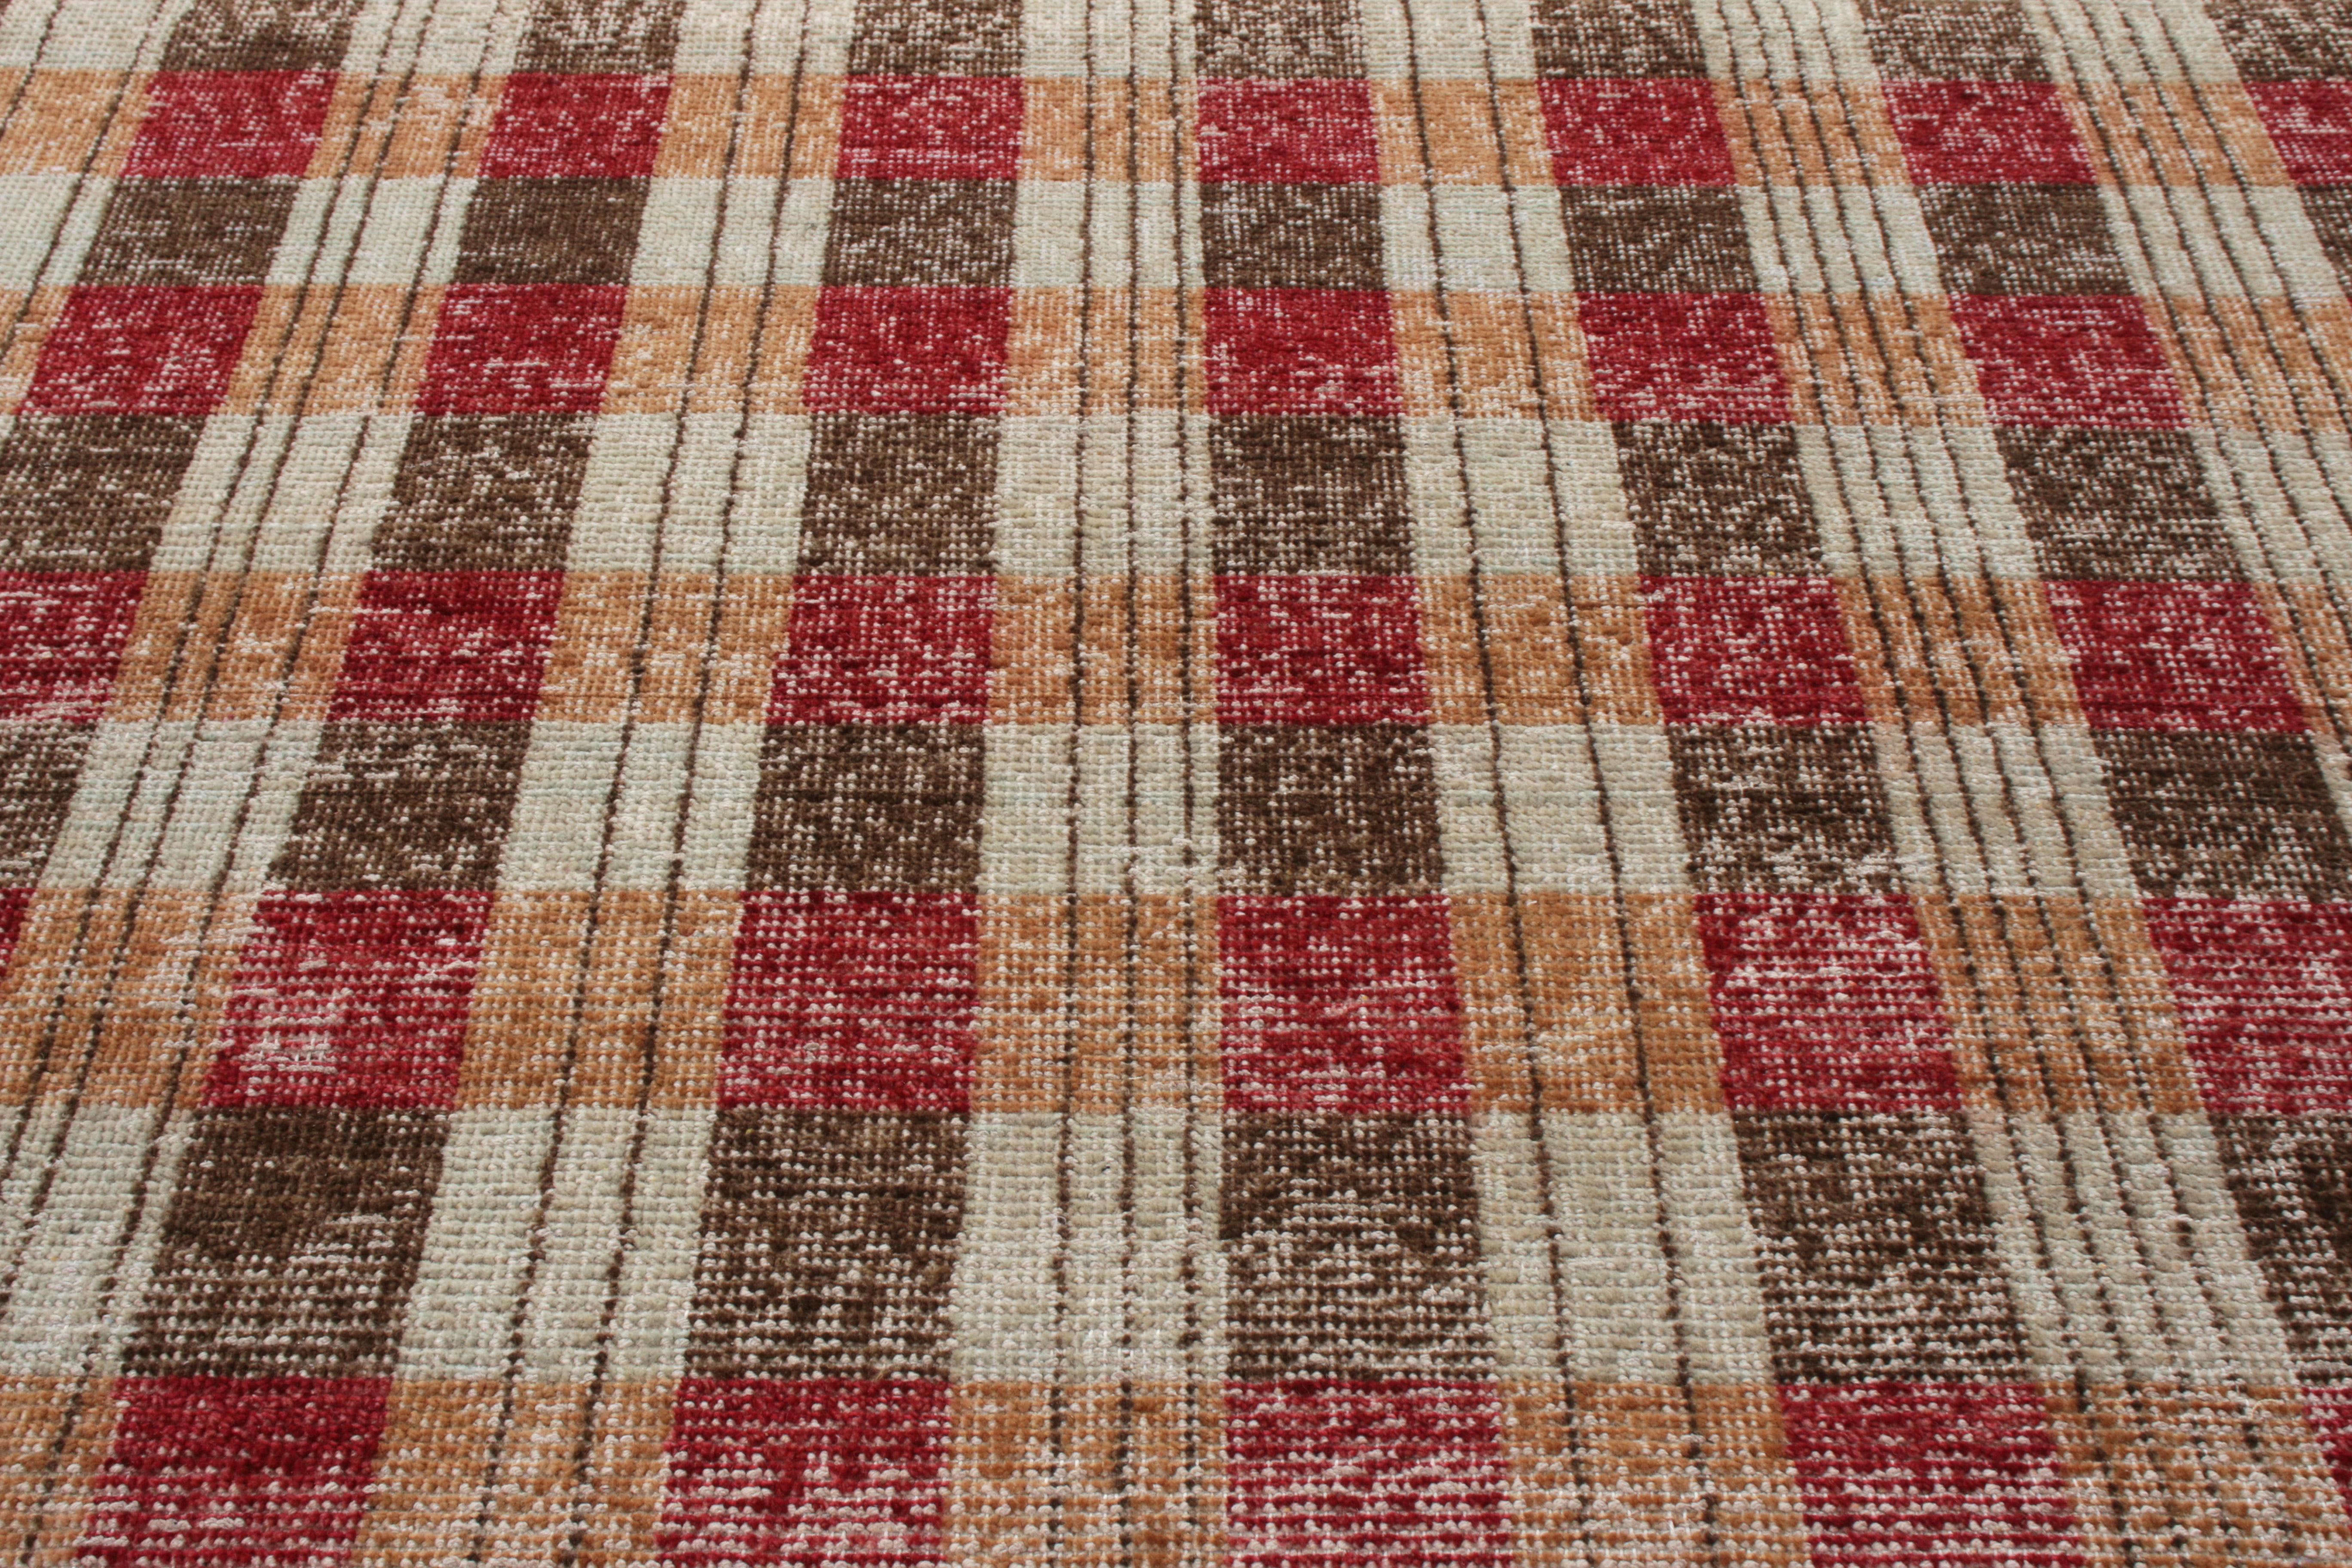 Indian Rug & Kilim’s Distressed Classic Style Rug in Beige-Brown, Red Geometric Pattern For Sale